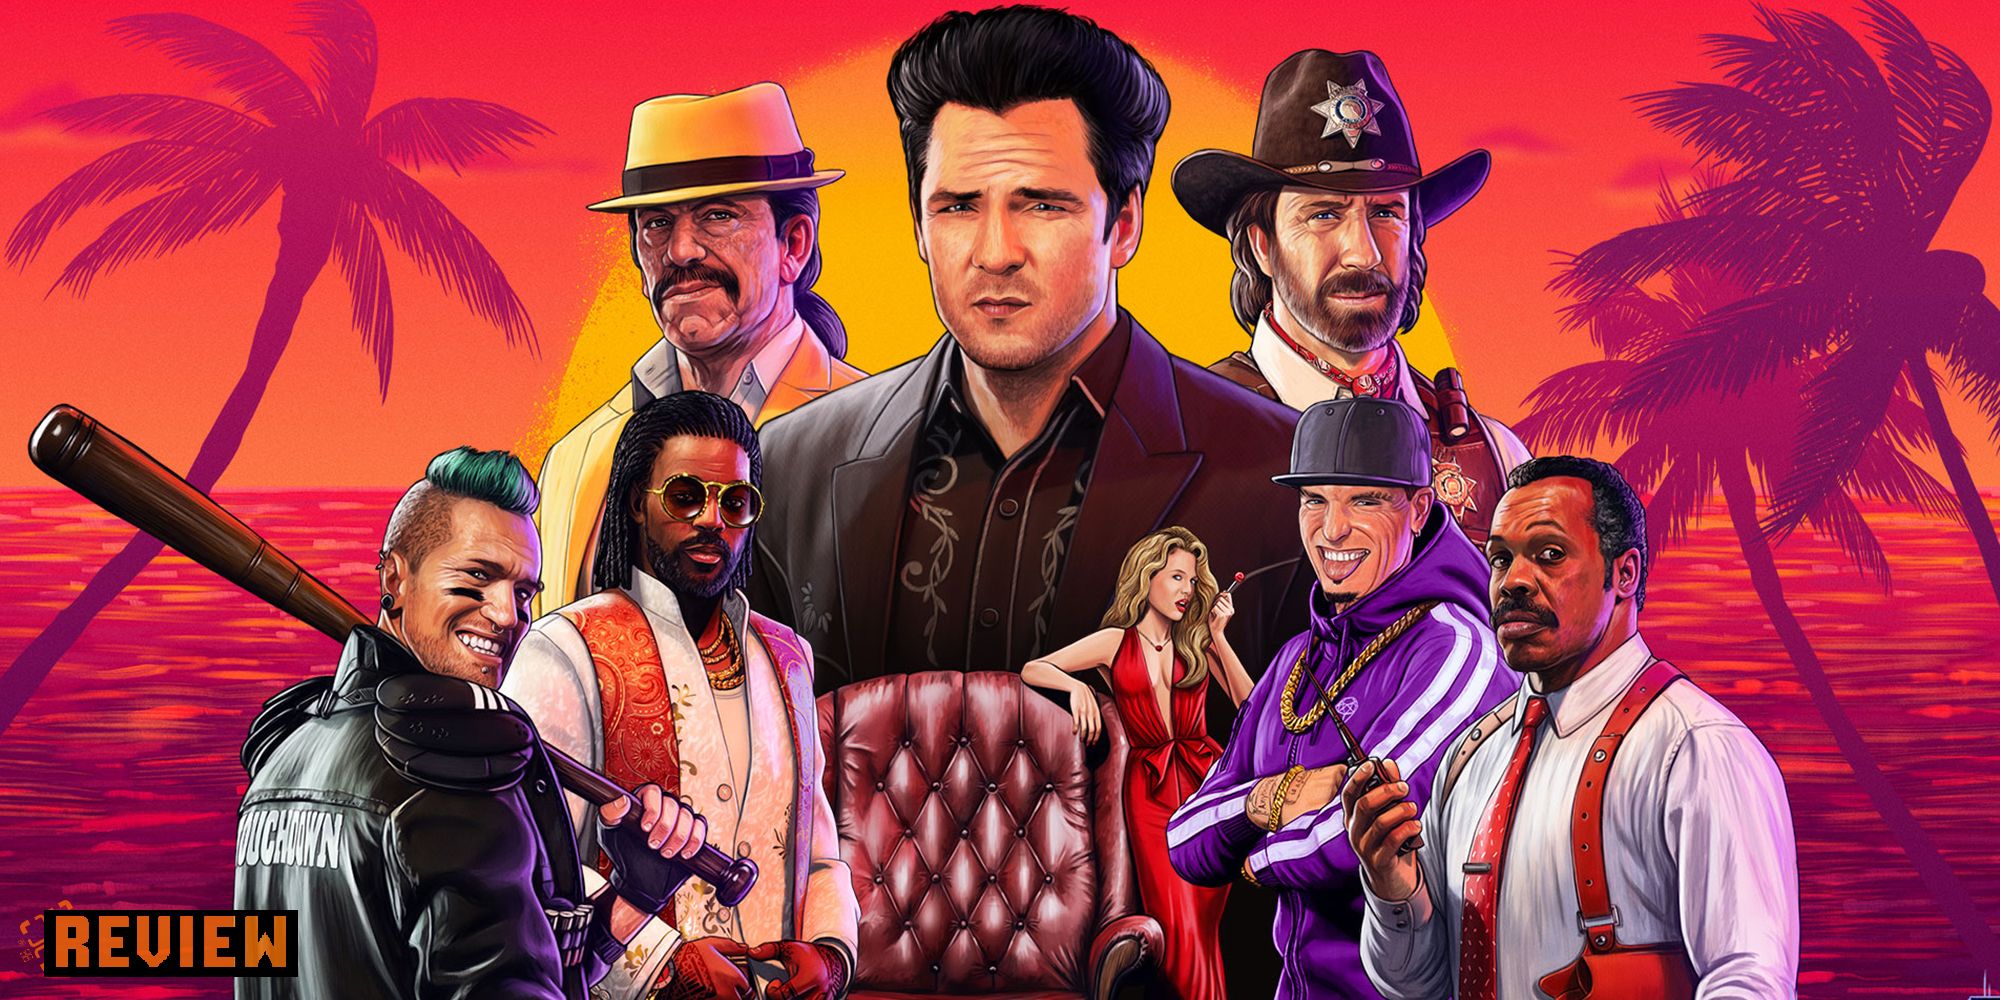 Crime Boss: Rockay City for android download